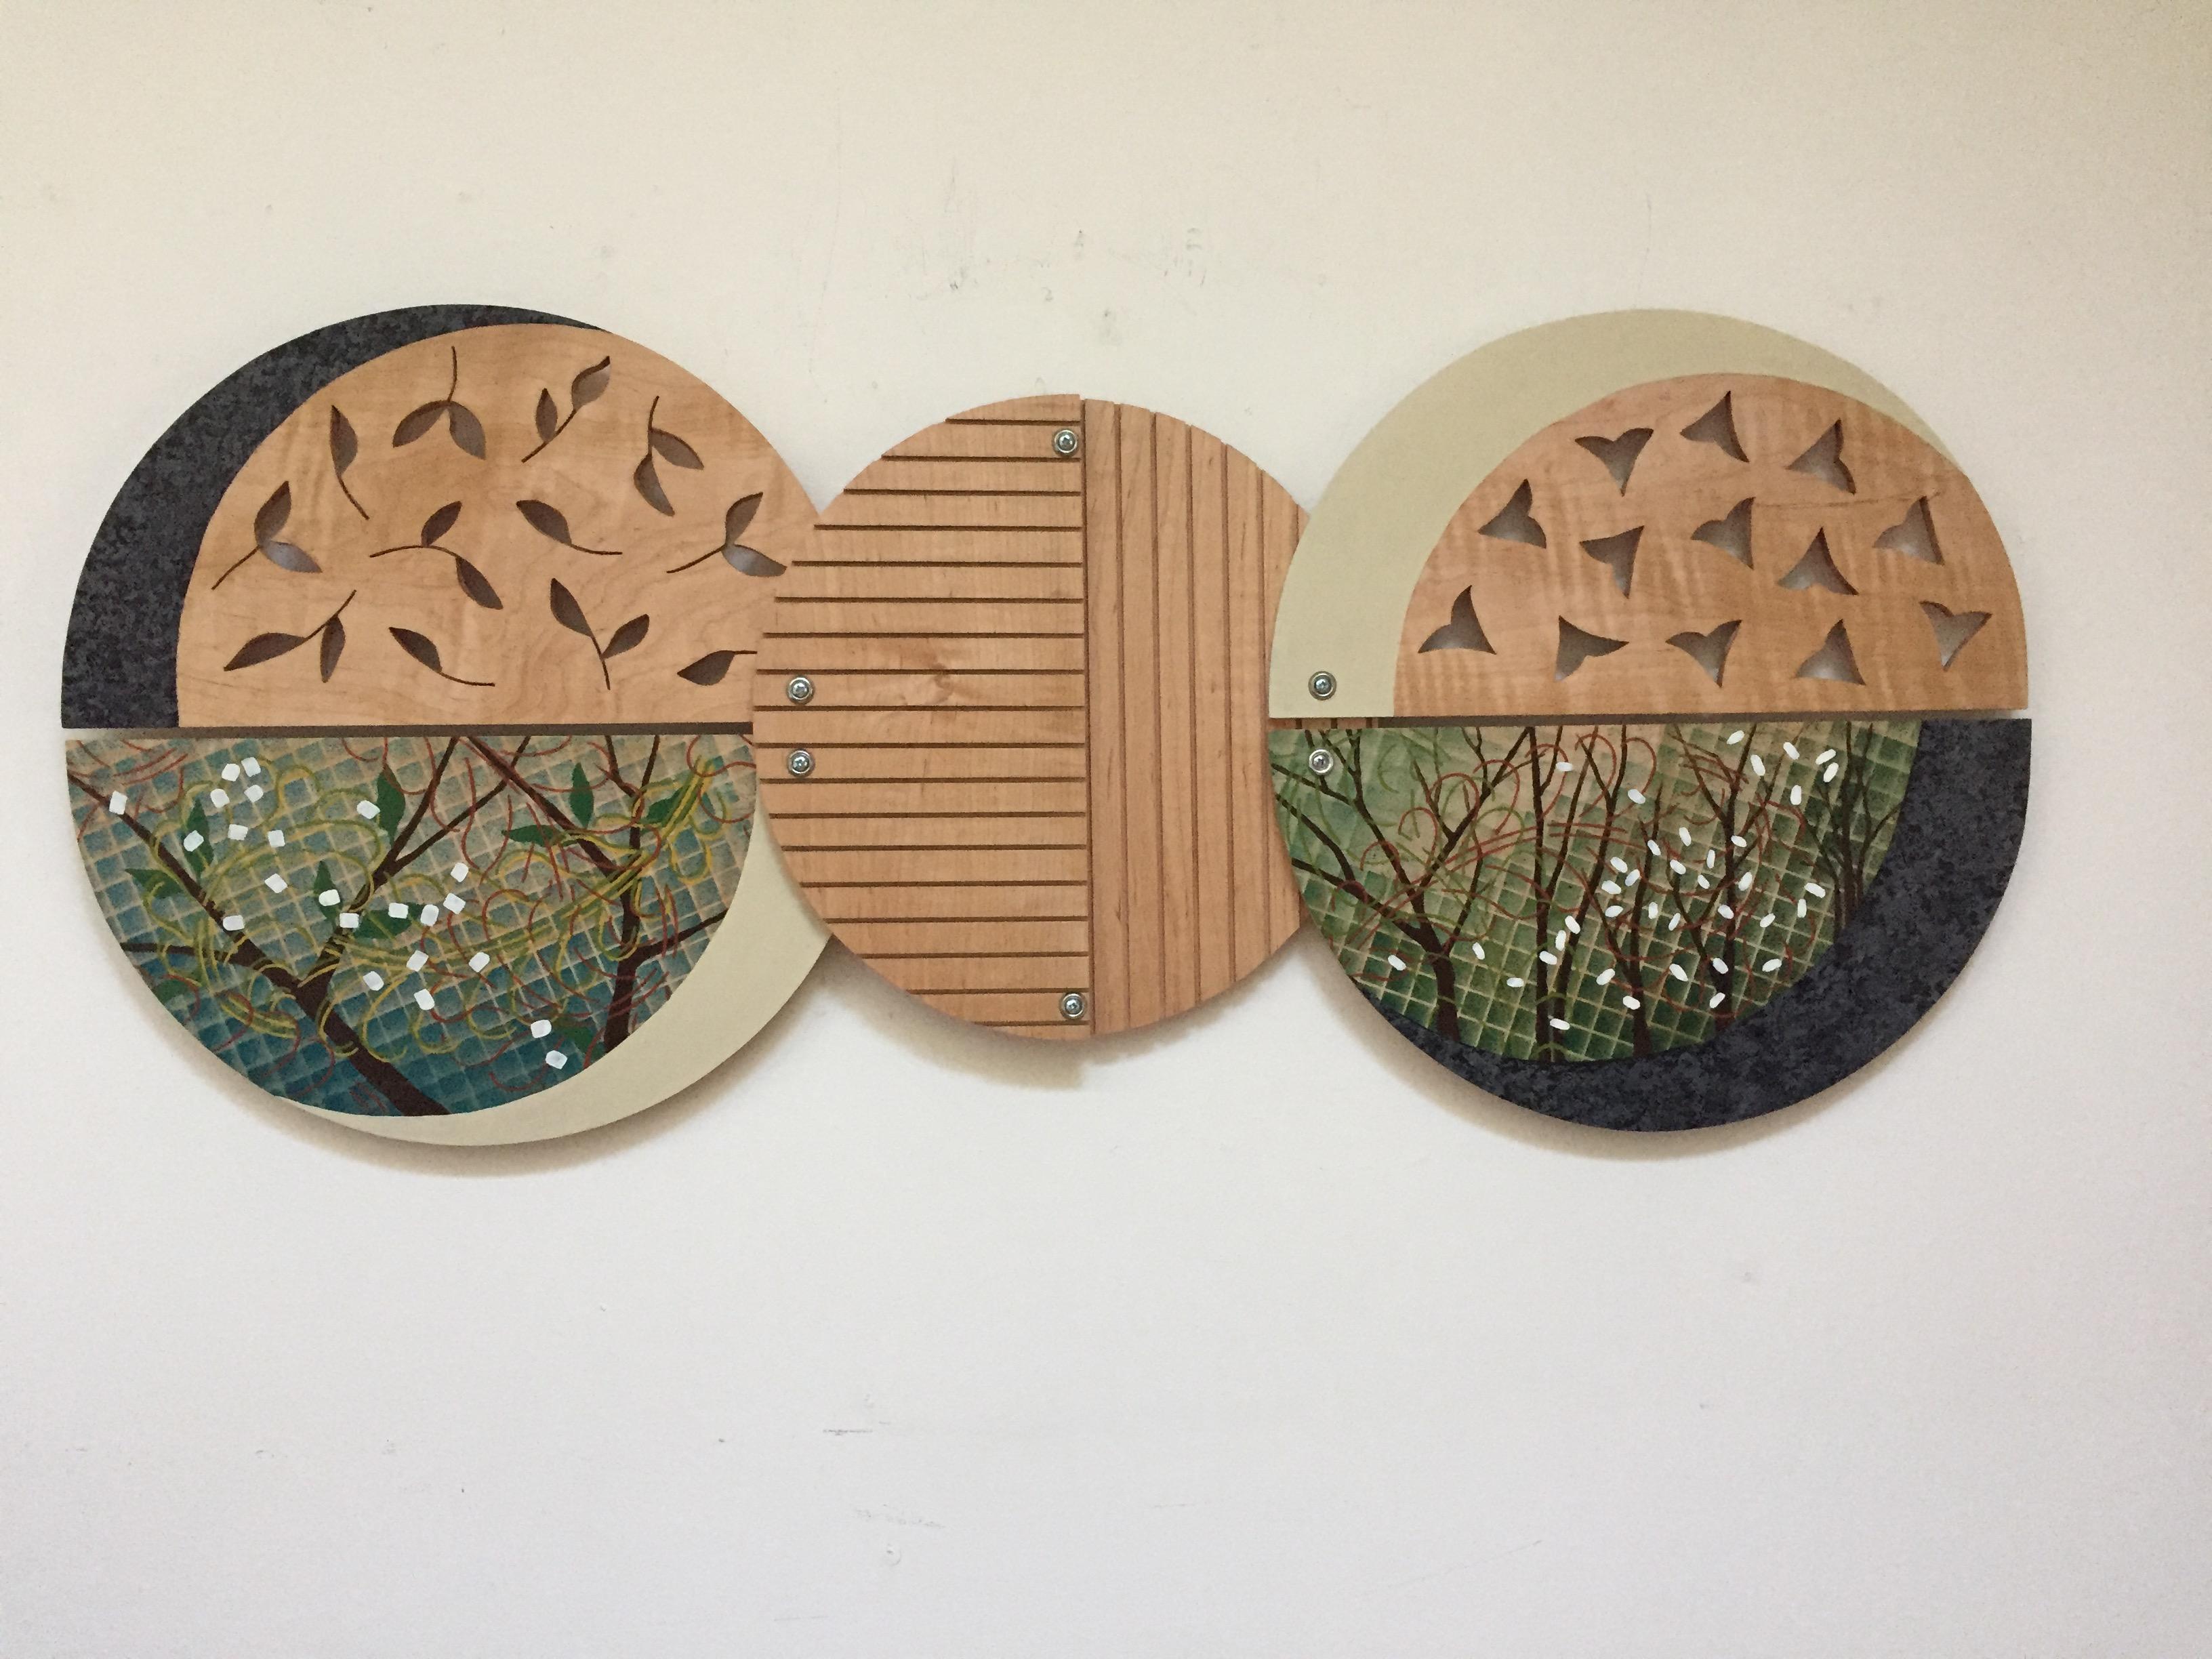 Charlotte Lees Still-Life Sculpture - "Earth Series, 7",  Wall sculpture, hand painting and carving on wood 